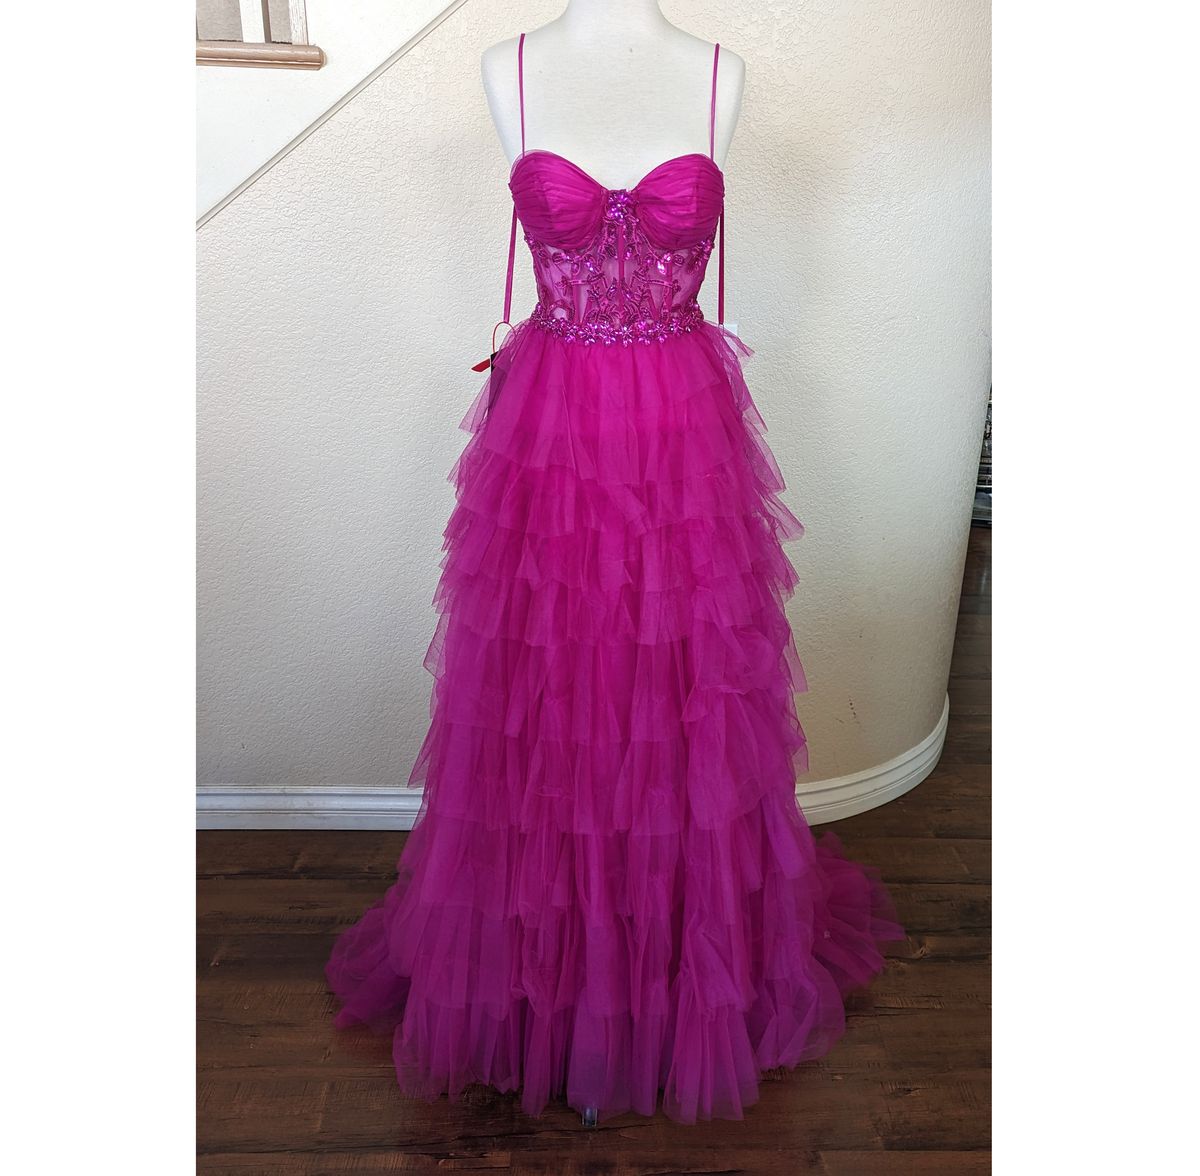 Style Fuchsia Sequin Corset Tulle Prom Ball Gown Dress Size 0 Prom Plunge Lace Pink Ball Gown on Queenly